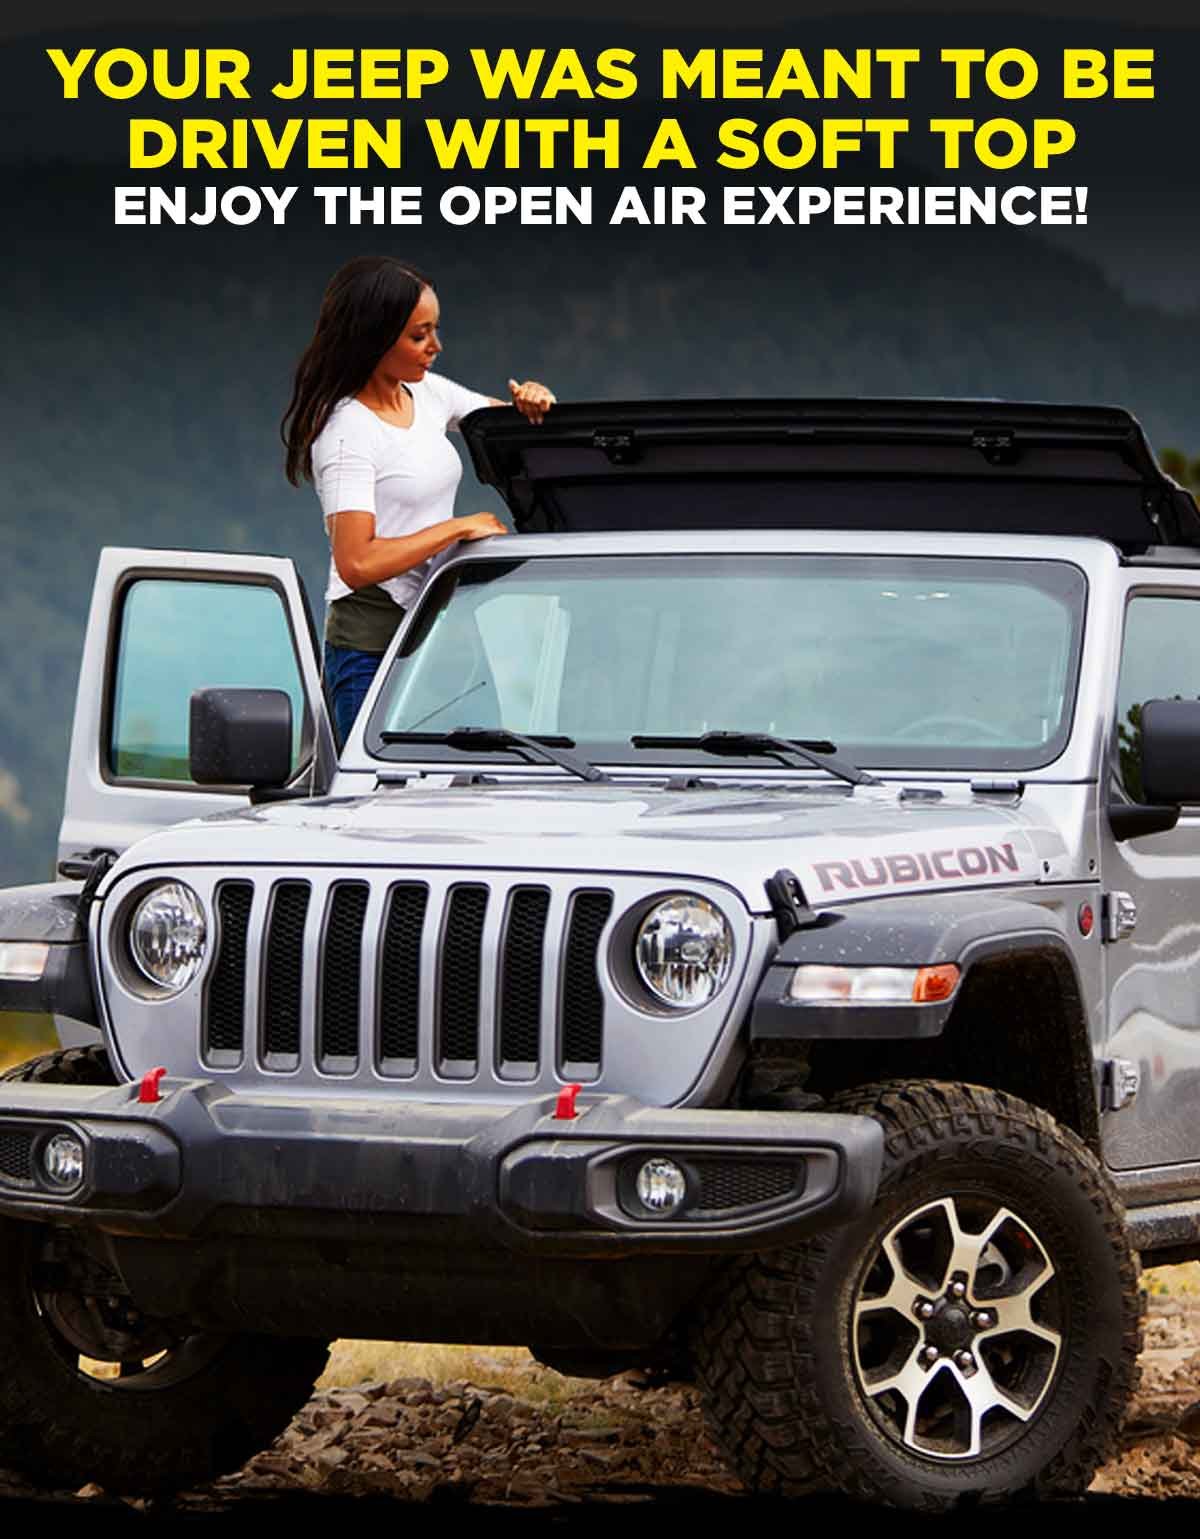 Your Jeep Was Meant To Be Driven With A Soft Top Enjoy The Open Air Experience!